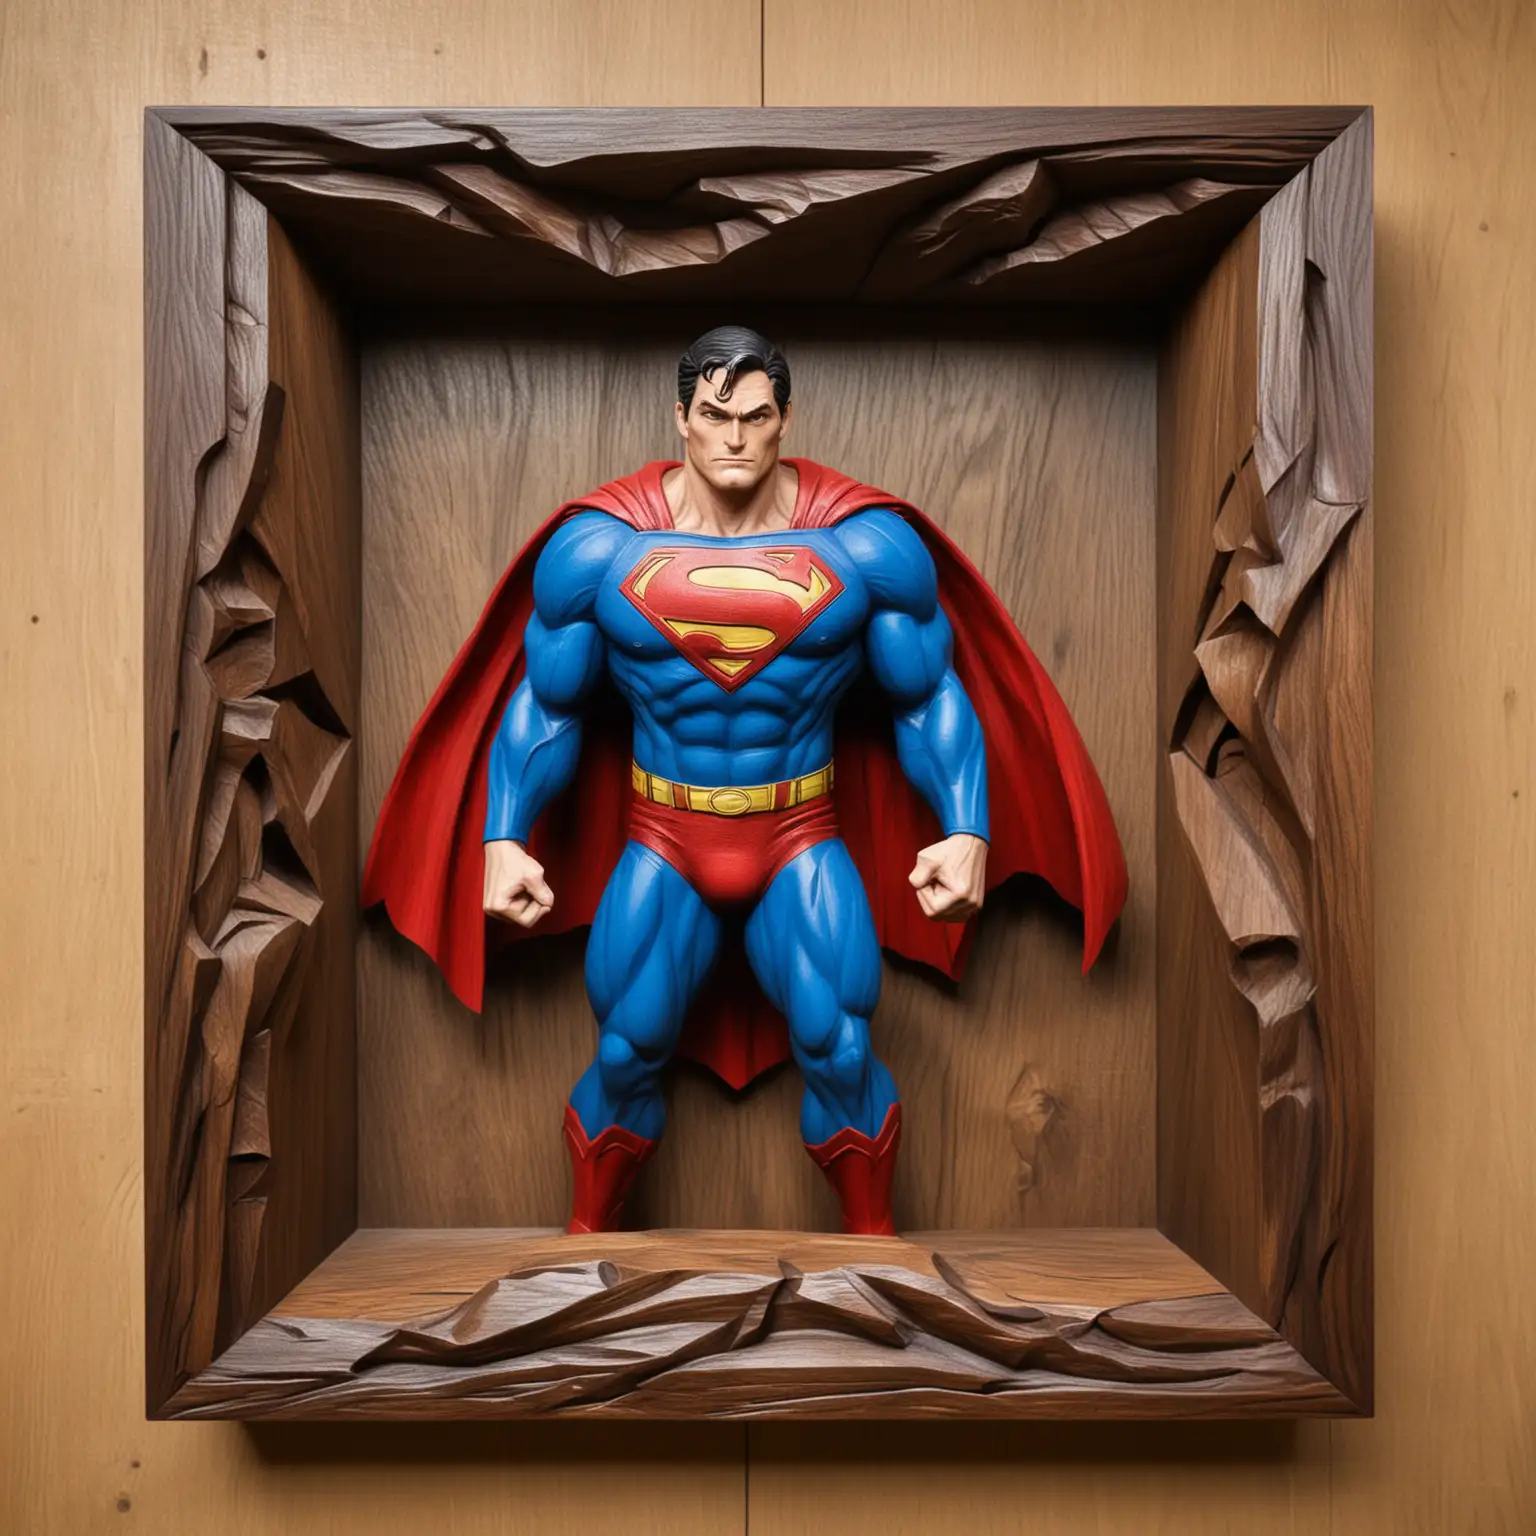 3D Carved Superman Statue Standing in Oak Wood Tunnel Frame